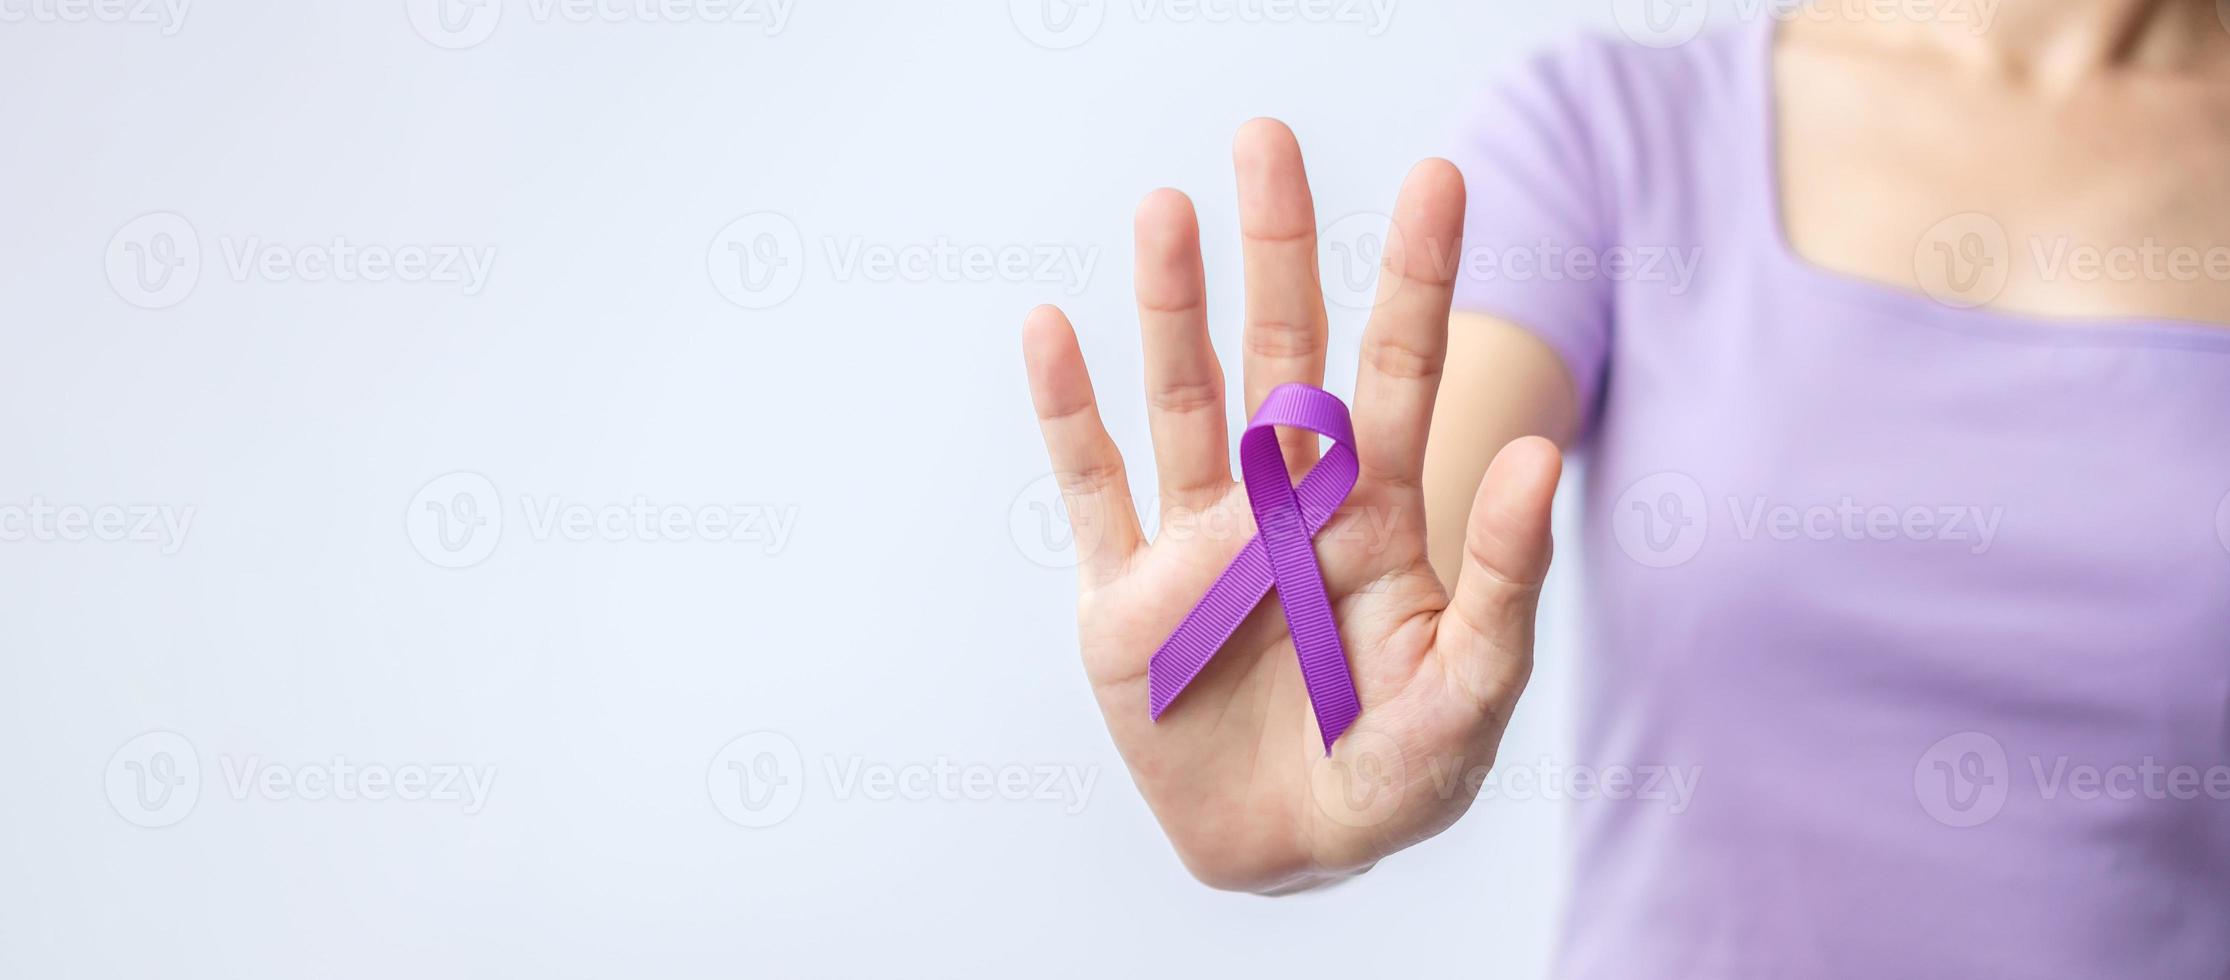 purple Ribbon for Violence, Pancreatic, Esophageal, Testicular cancer, Alzheimer, epilepsy, lupus, Sarcoidosis and Fibromyalgia. Awareness month and World cancer day concept photo